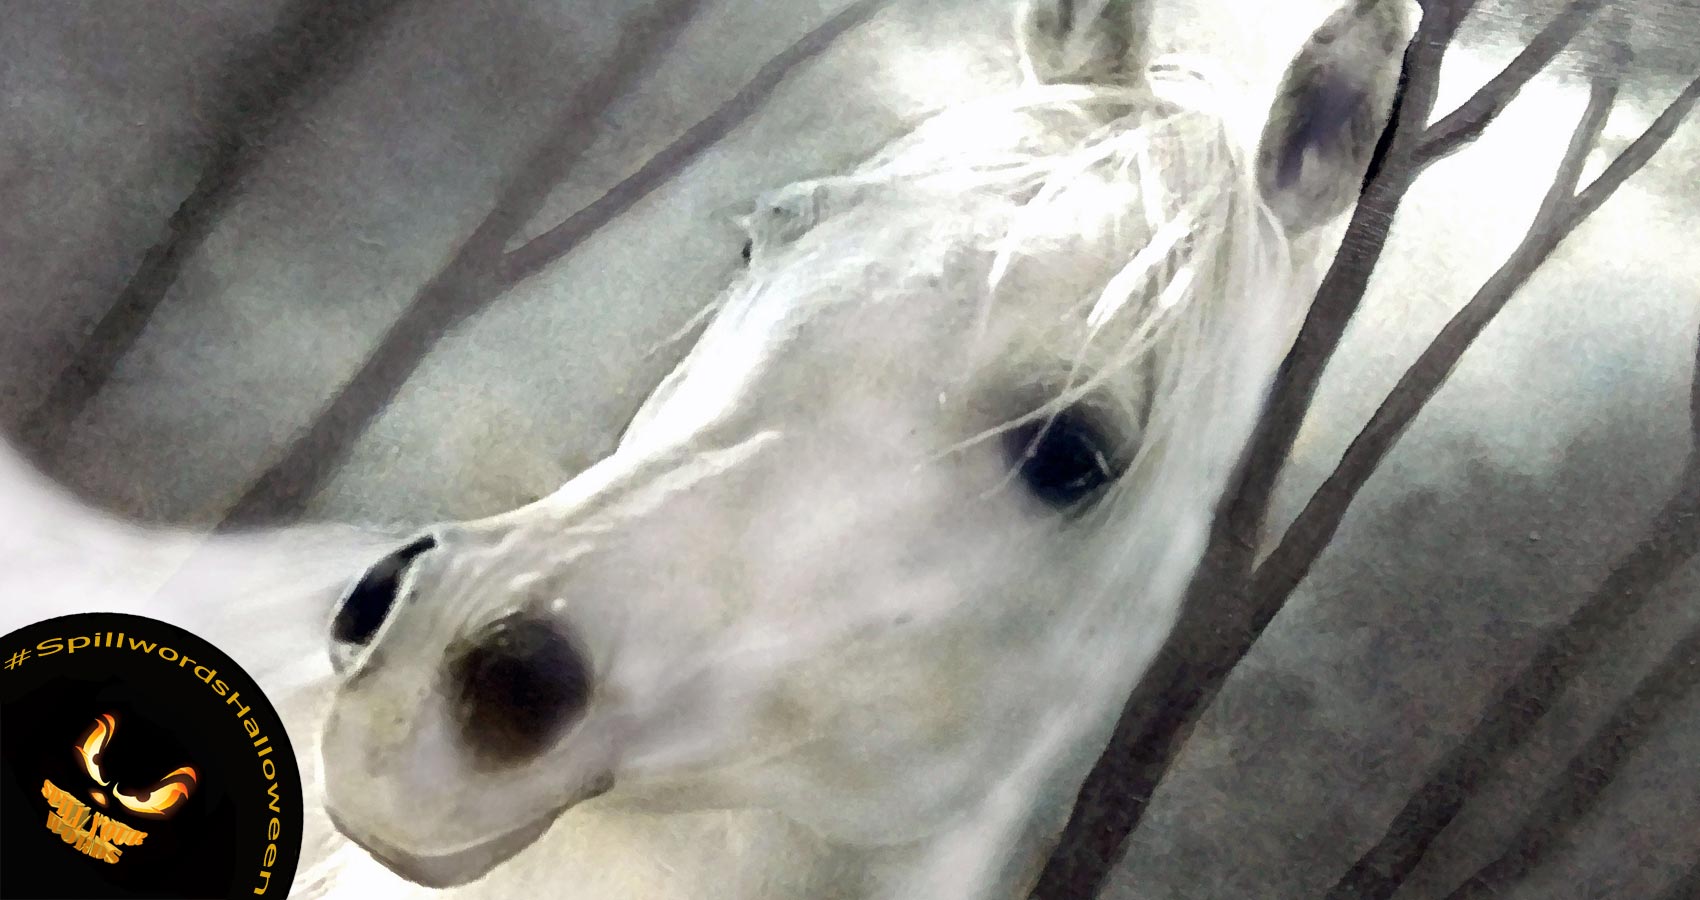 The Painting of The White Horse, story by Patrick McAteer at Spillwords.com